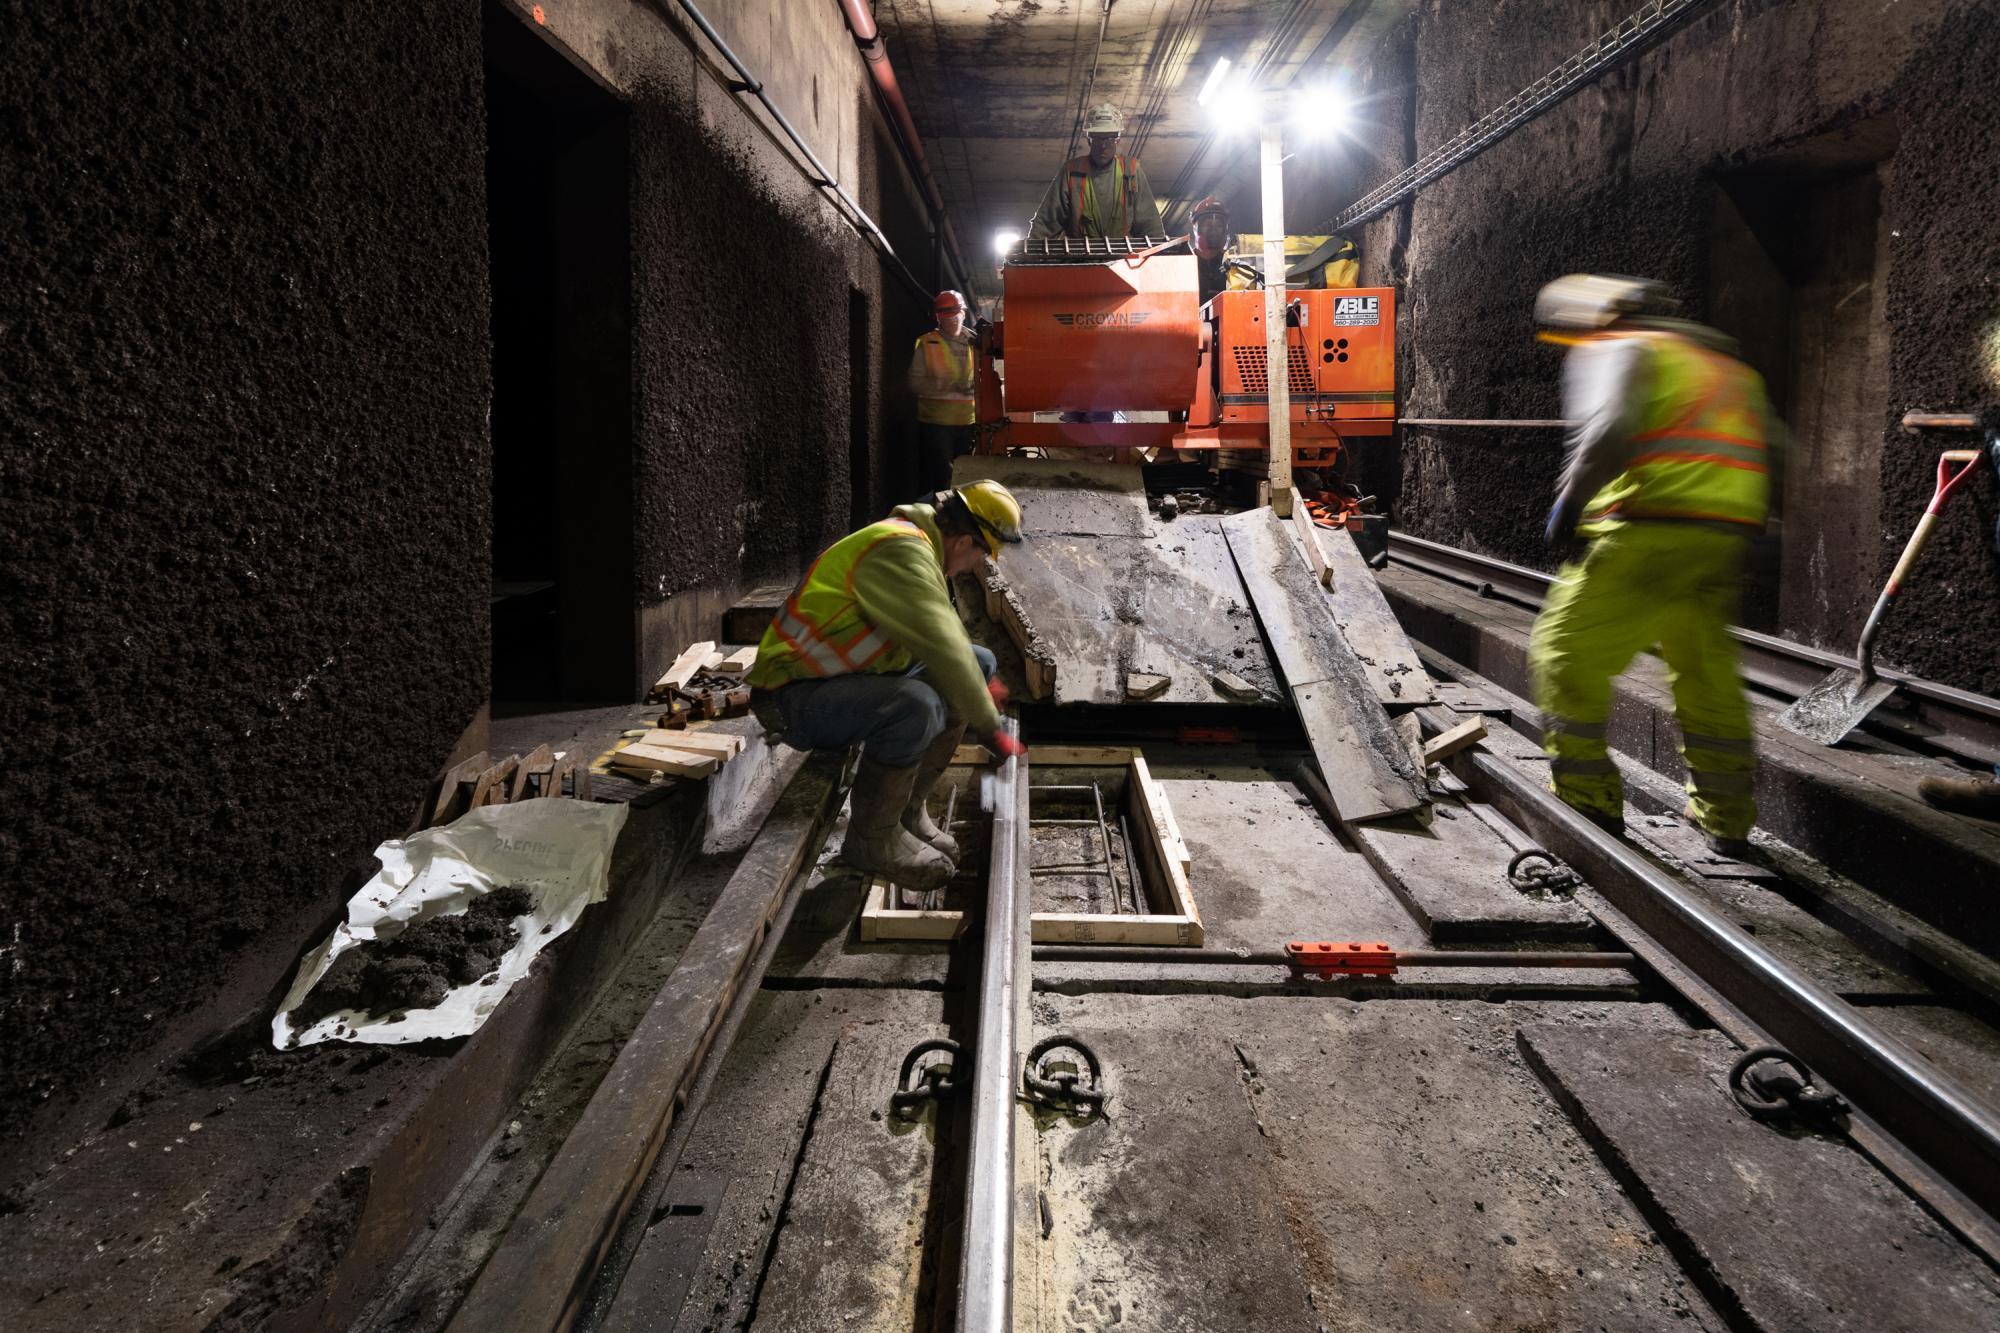 Workers wearing flourescent green jackets place new rebar under the subway tracks inside a subway tunnel. Behind them, three more workers watch over them from the top of an orange machine that has lights illuminating the work